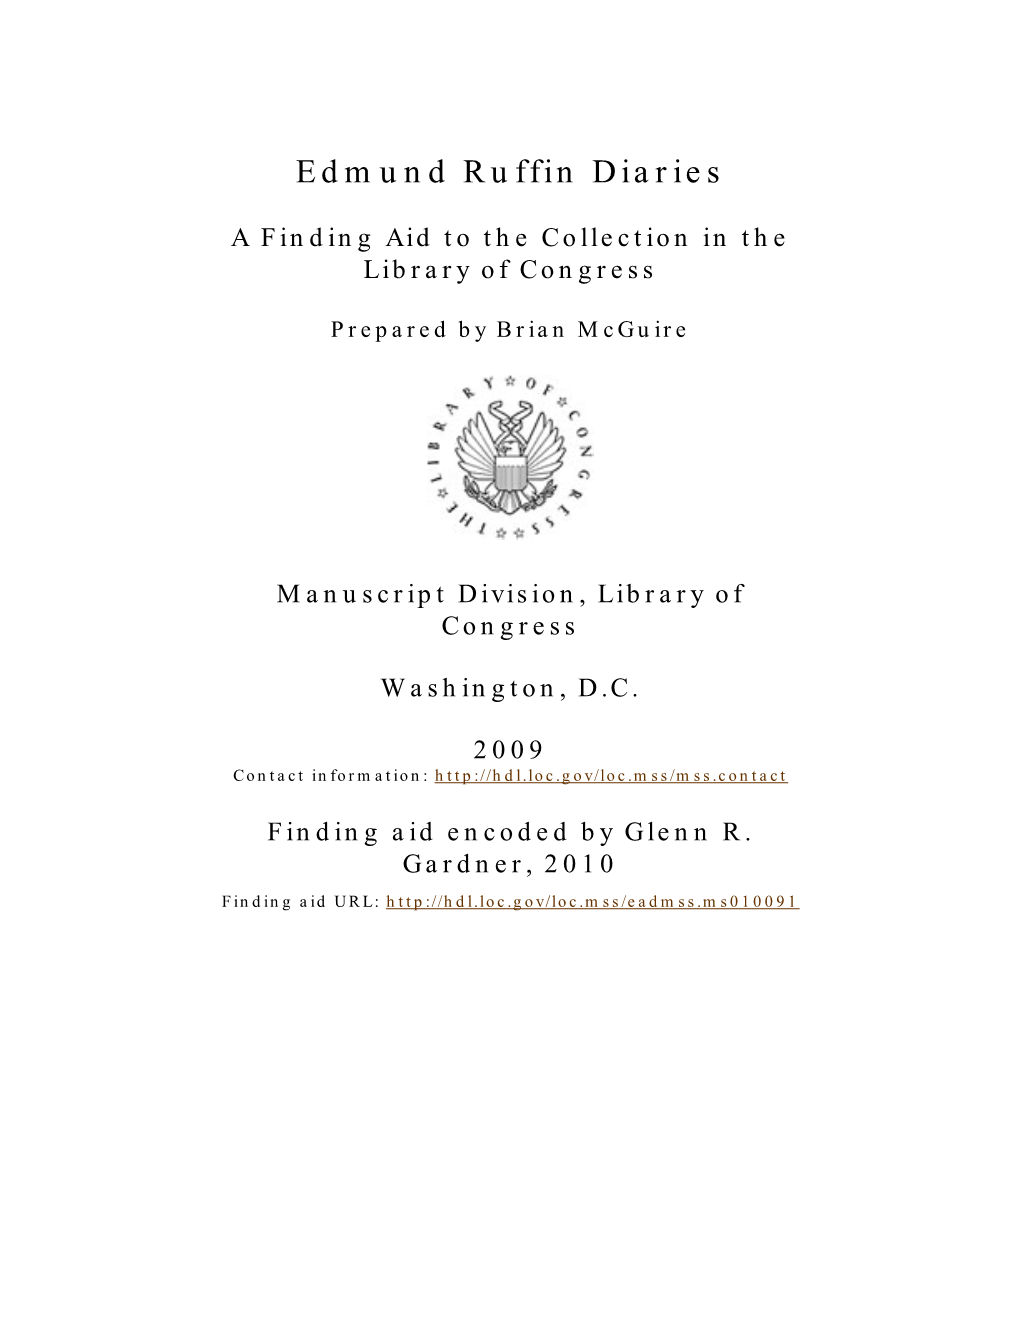 Edmund Ruffin Diaries [Finding Aid]. Library of Congress. [PDF